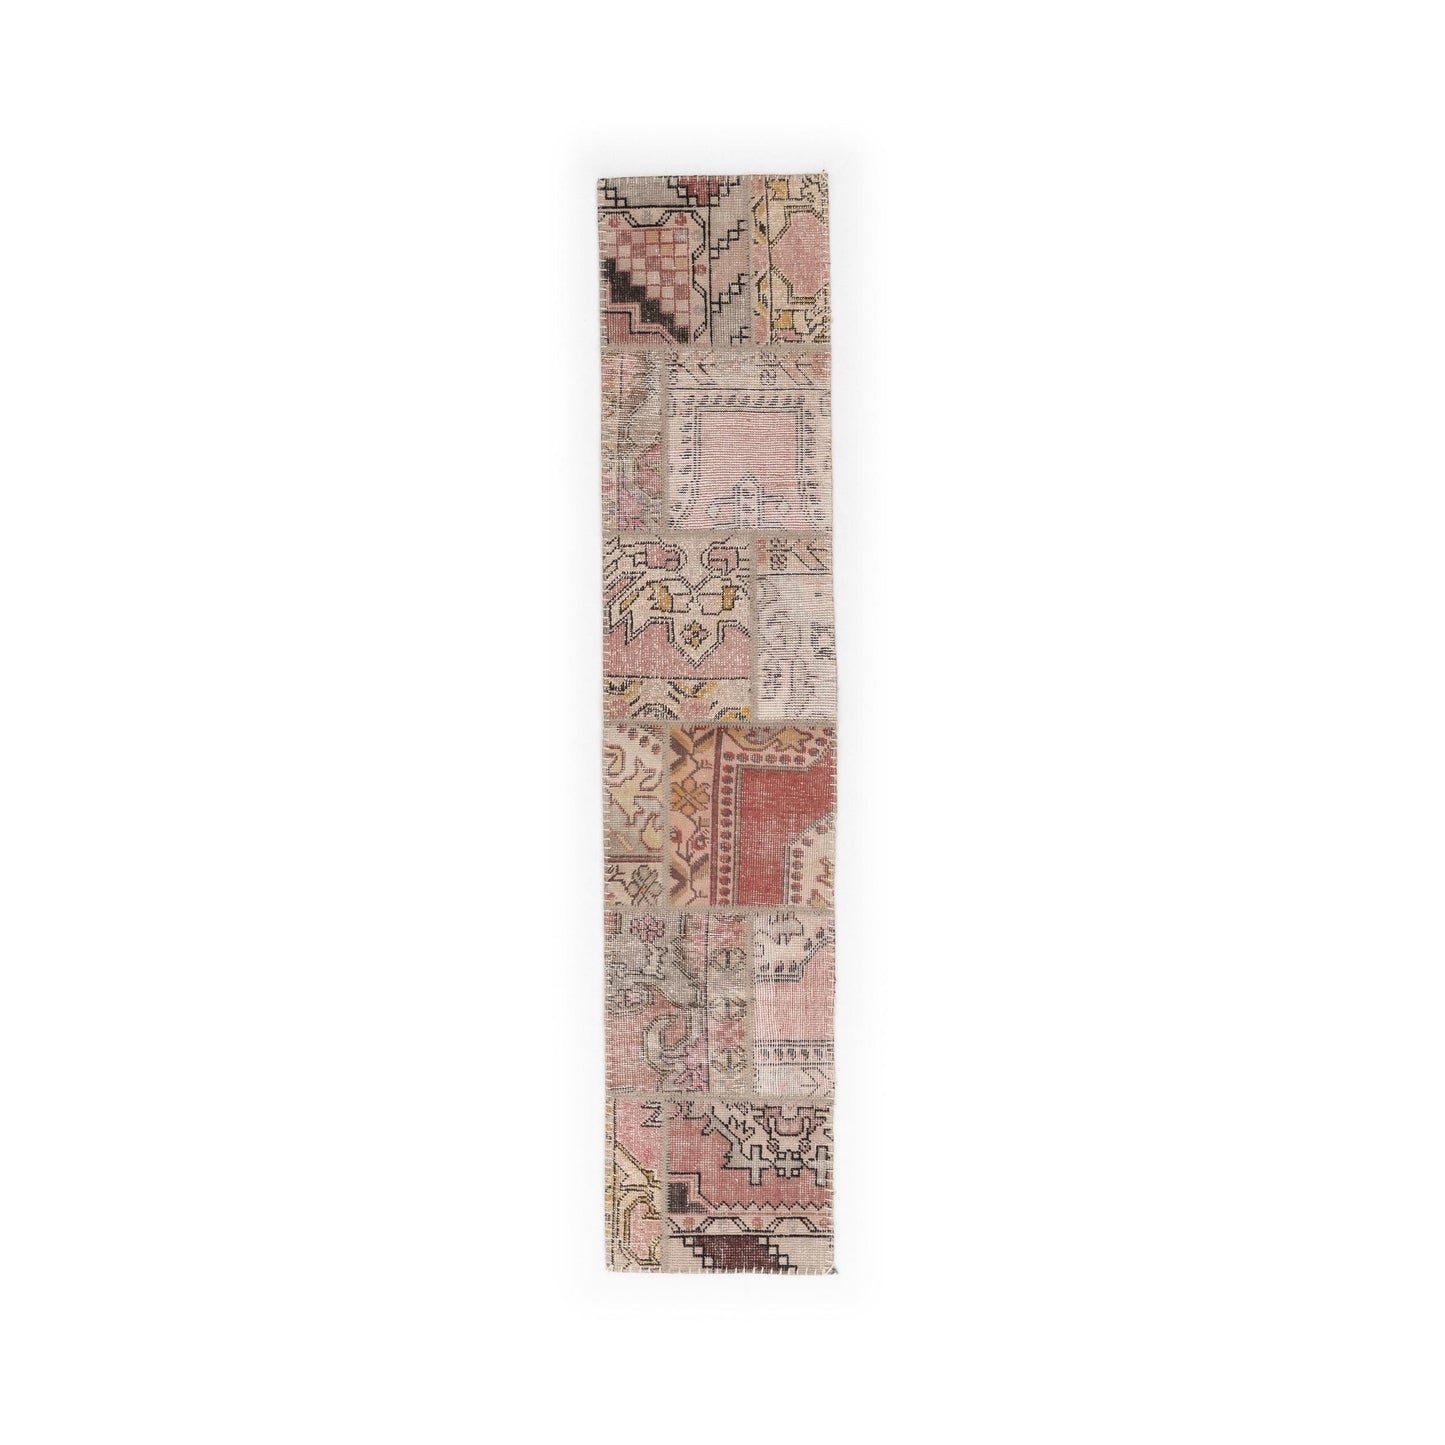 Oriental Rug Patchwork Hand Knotted Wool On Wool 53 x 250 Cm – 1’ 9' x 8’ 3’’ Pink C004 ER01